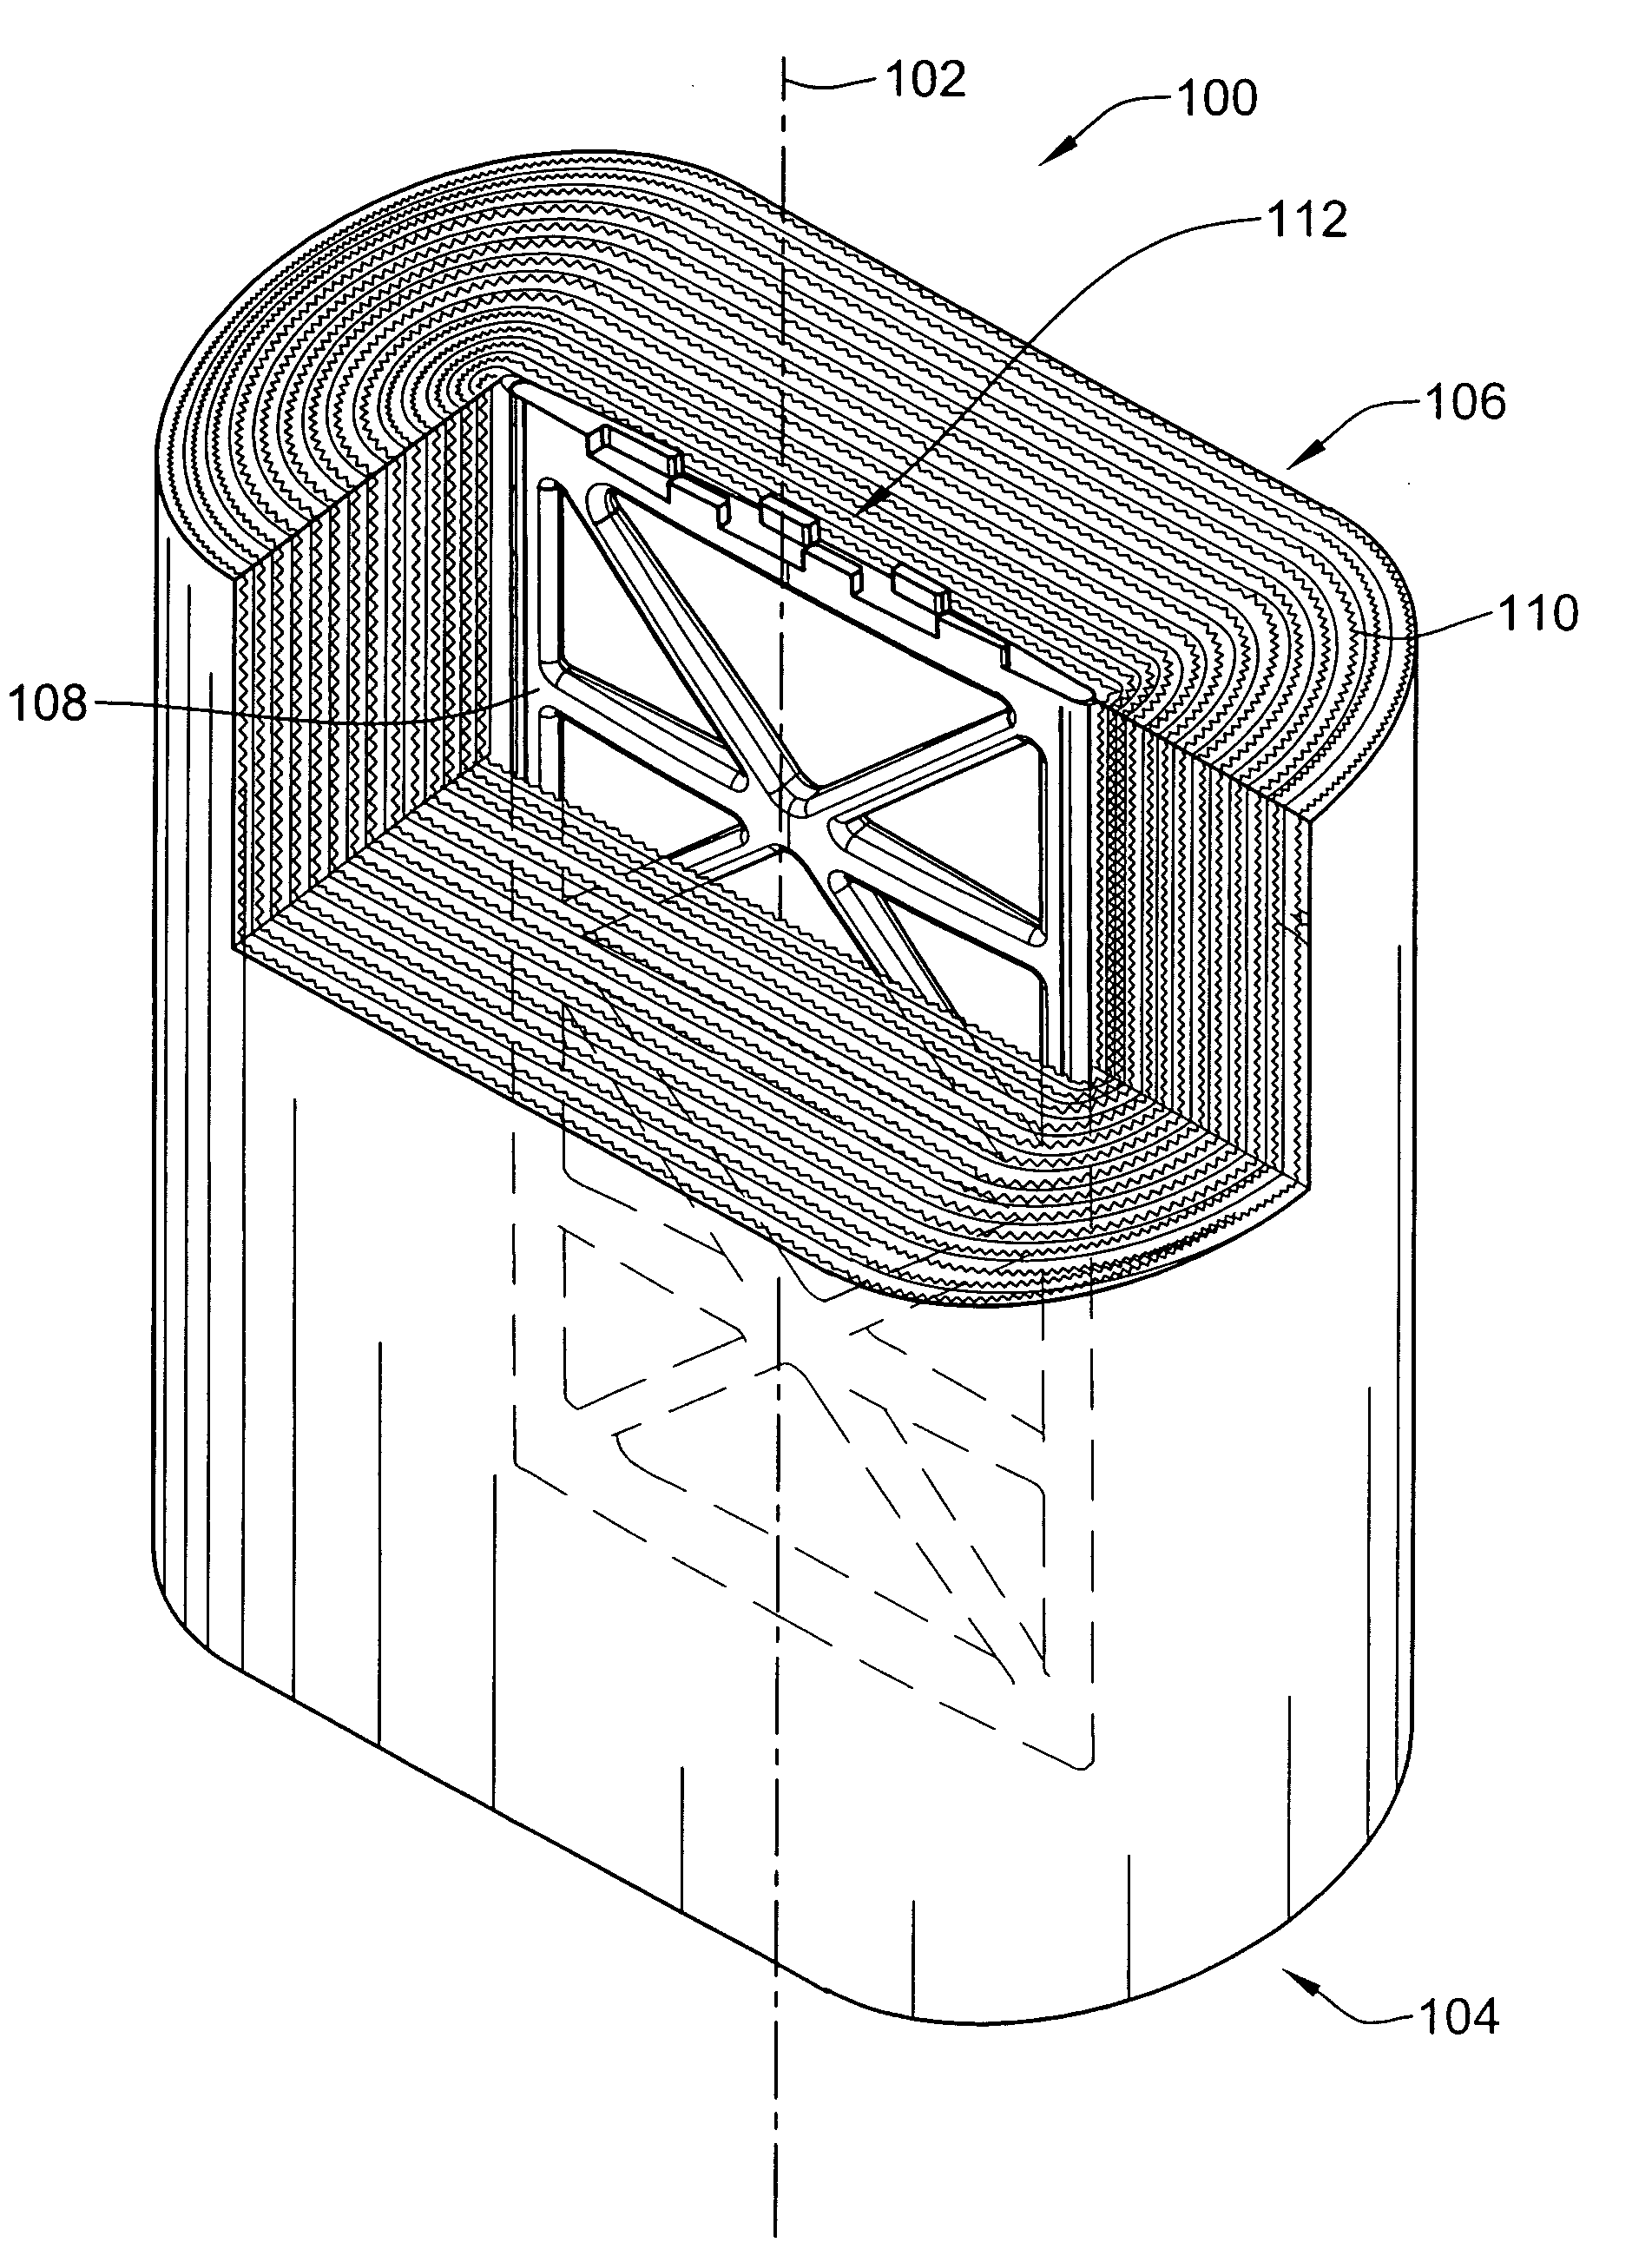 Fluid filter apparatus having filter media wound about a winding frame